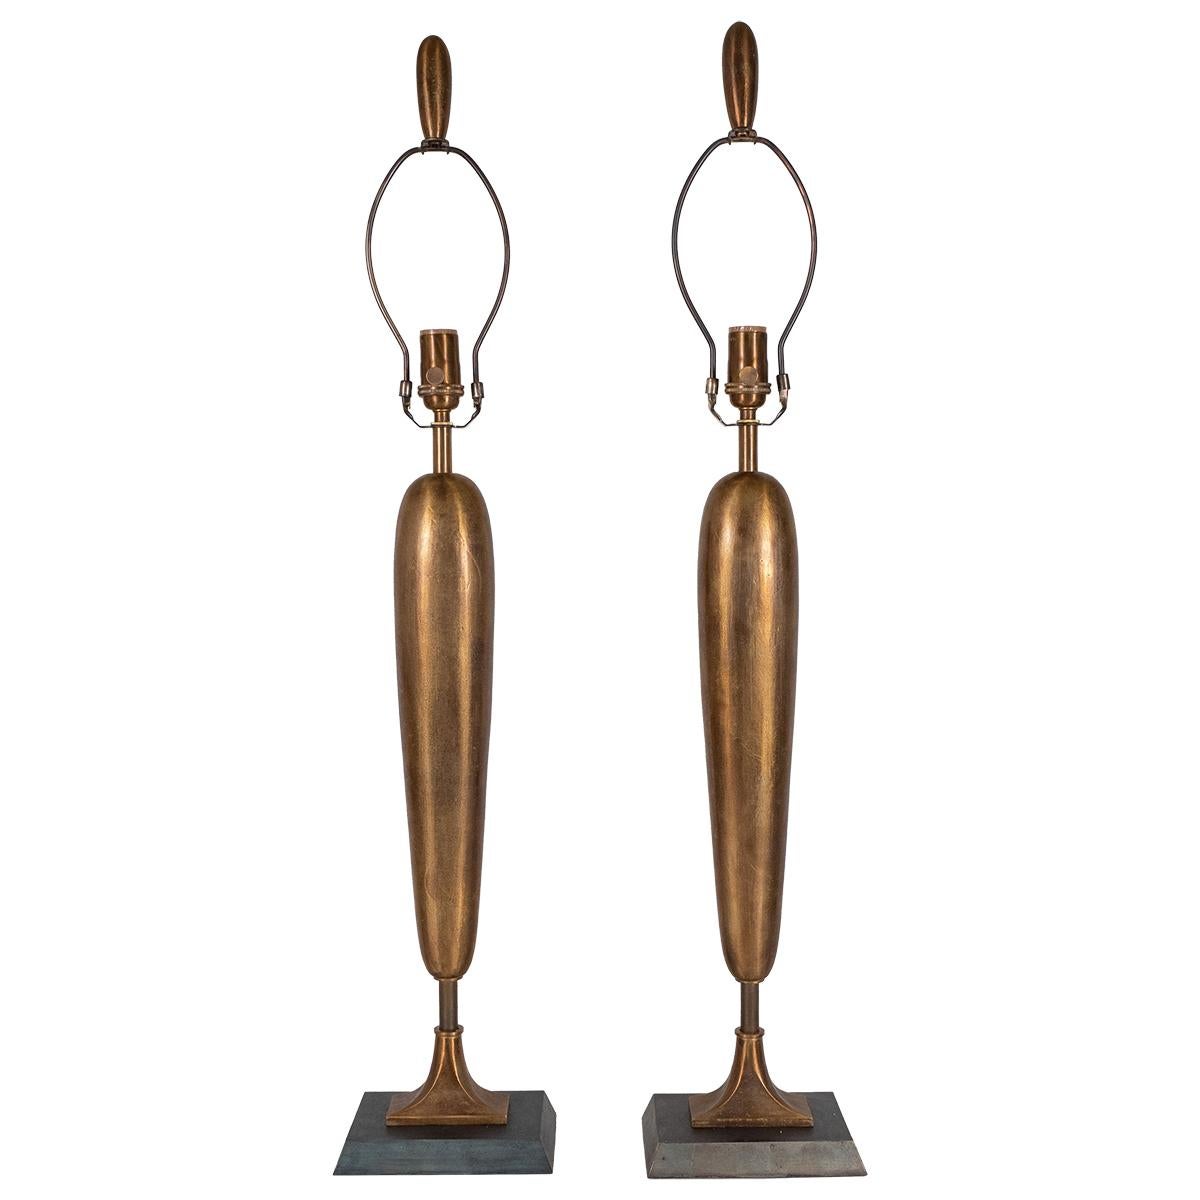 Pair of brass Deco inspired table lamps with bronze finish.